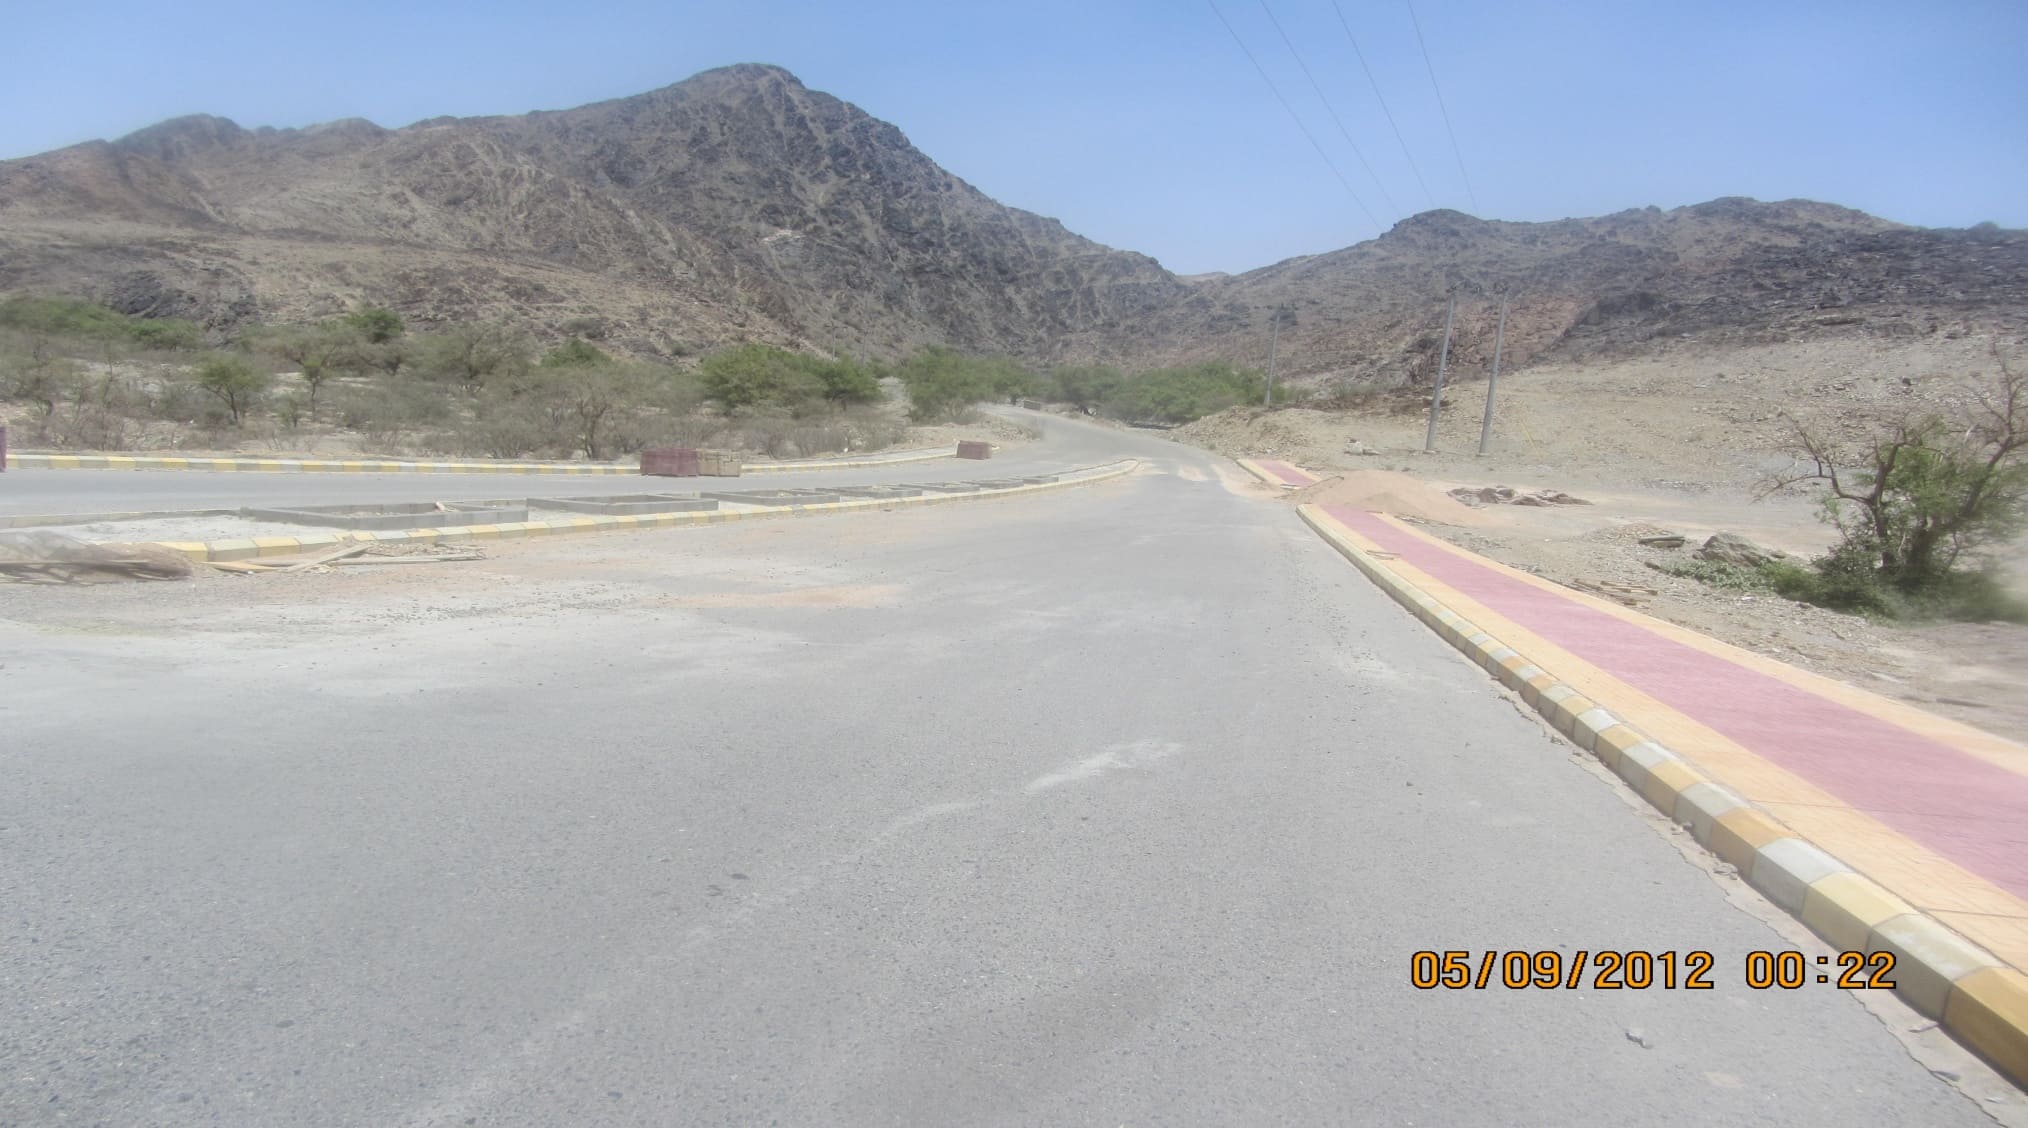 Project to improve and beautify the entrance to Khurman